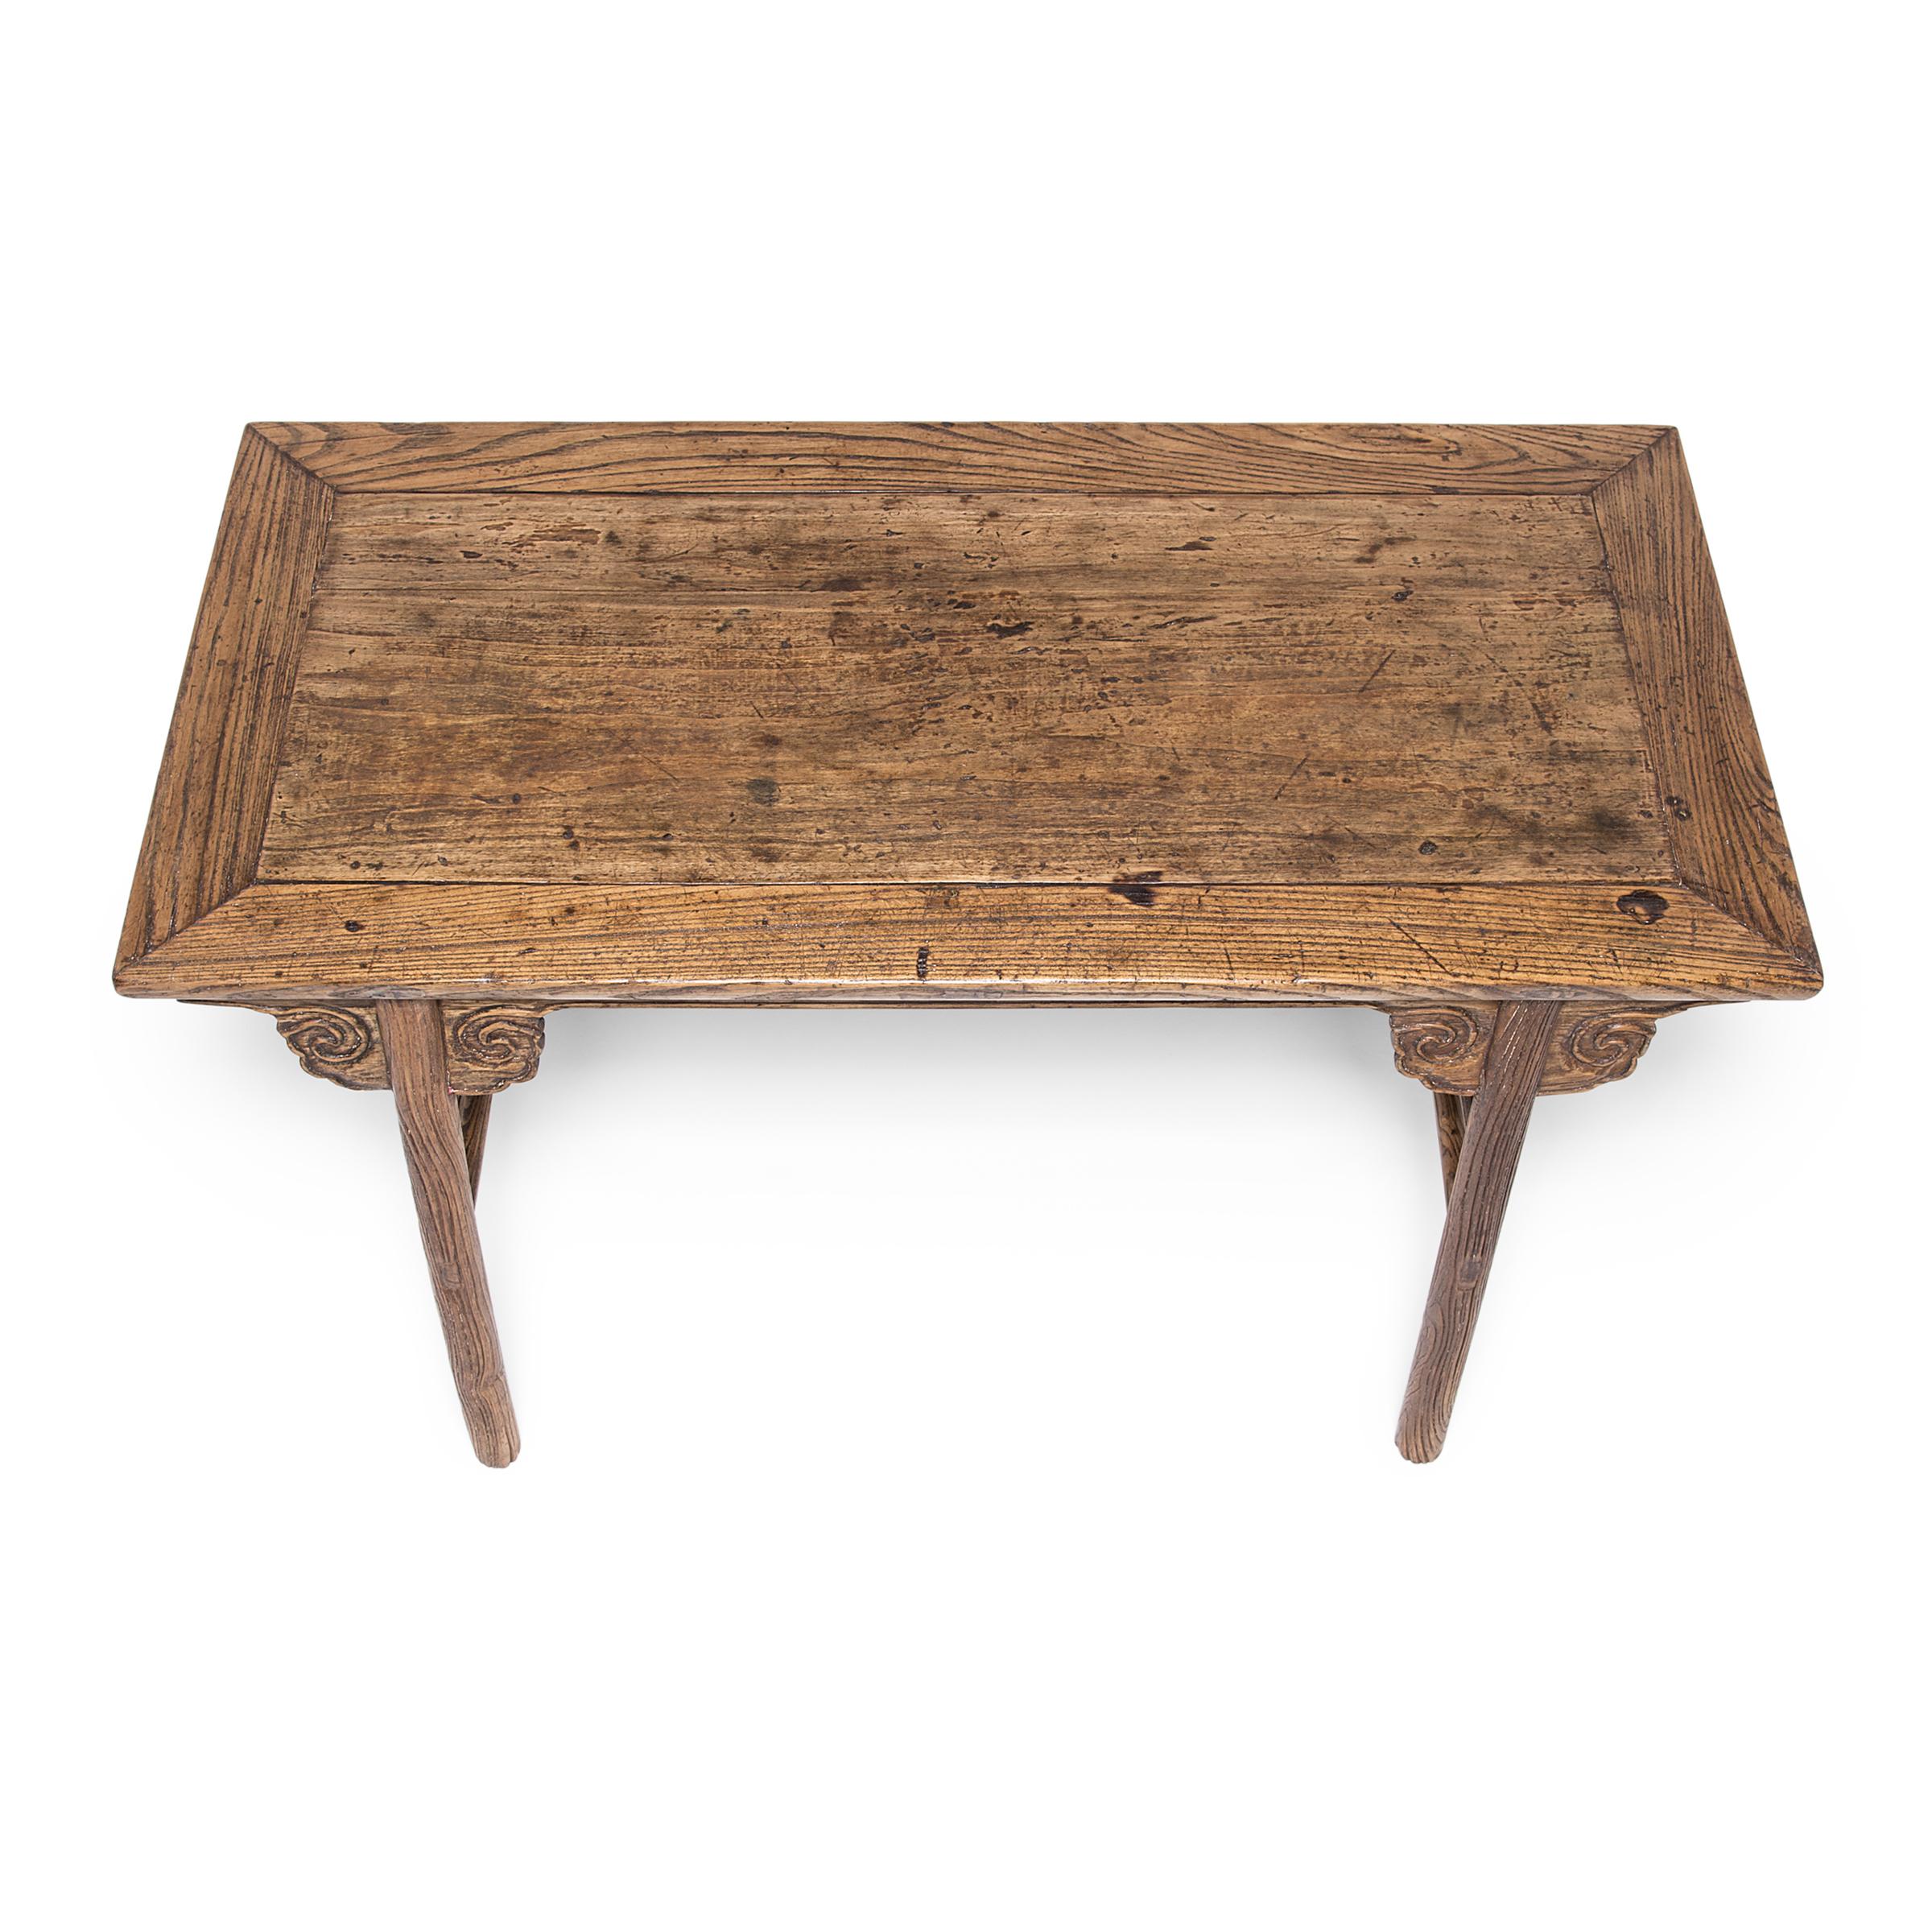 19th Century Chinese Writing Table with Cloud Spandrels, c. 1850 For Sale